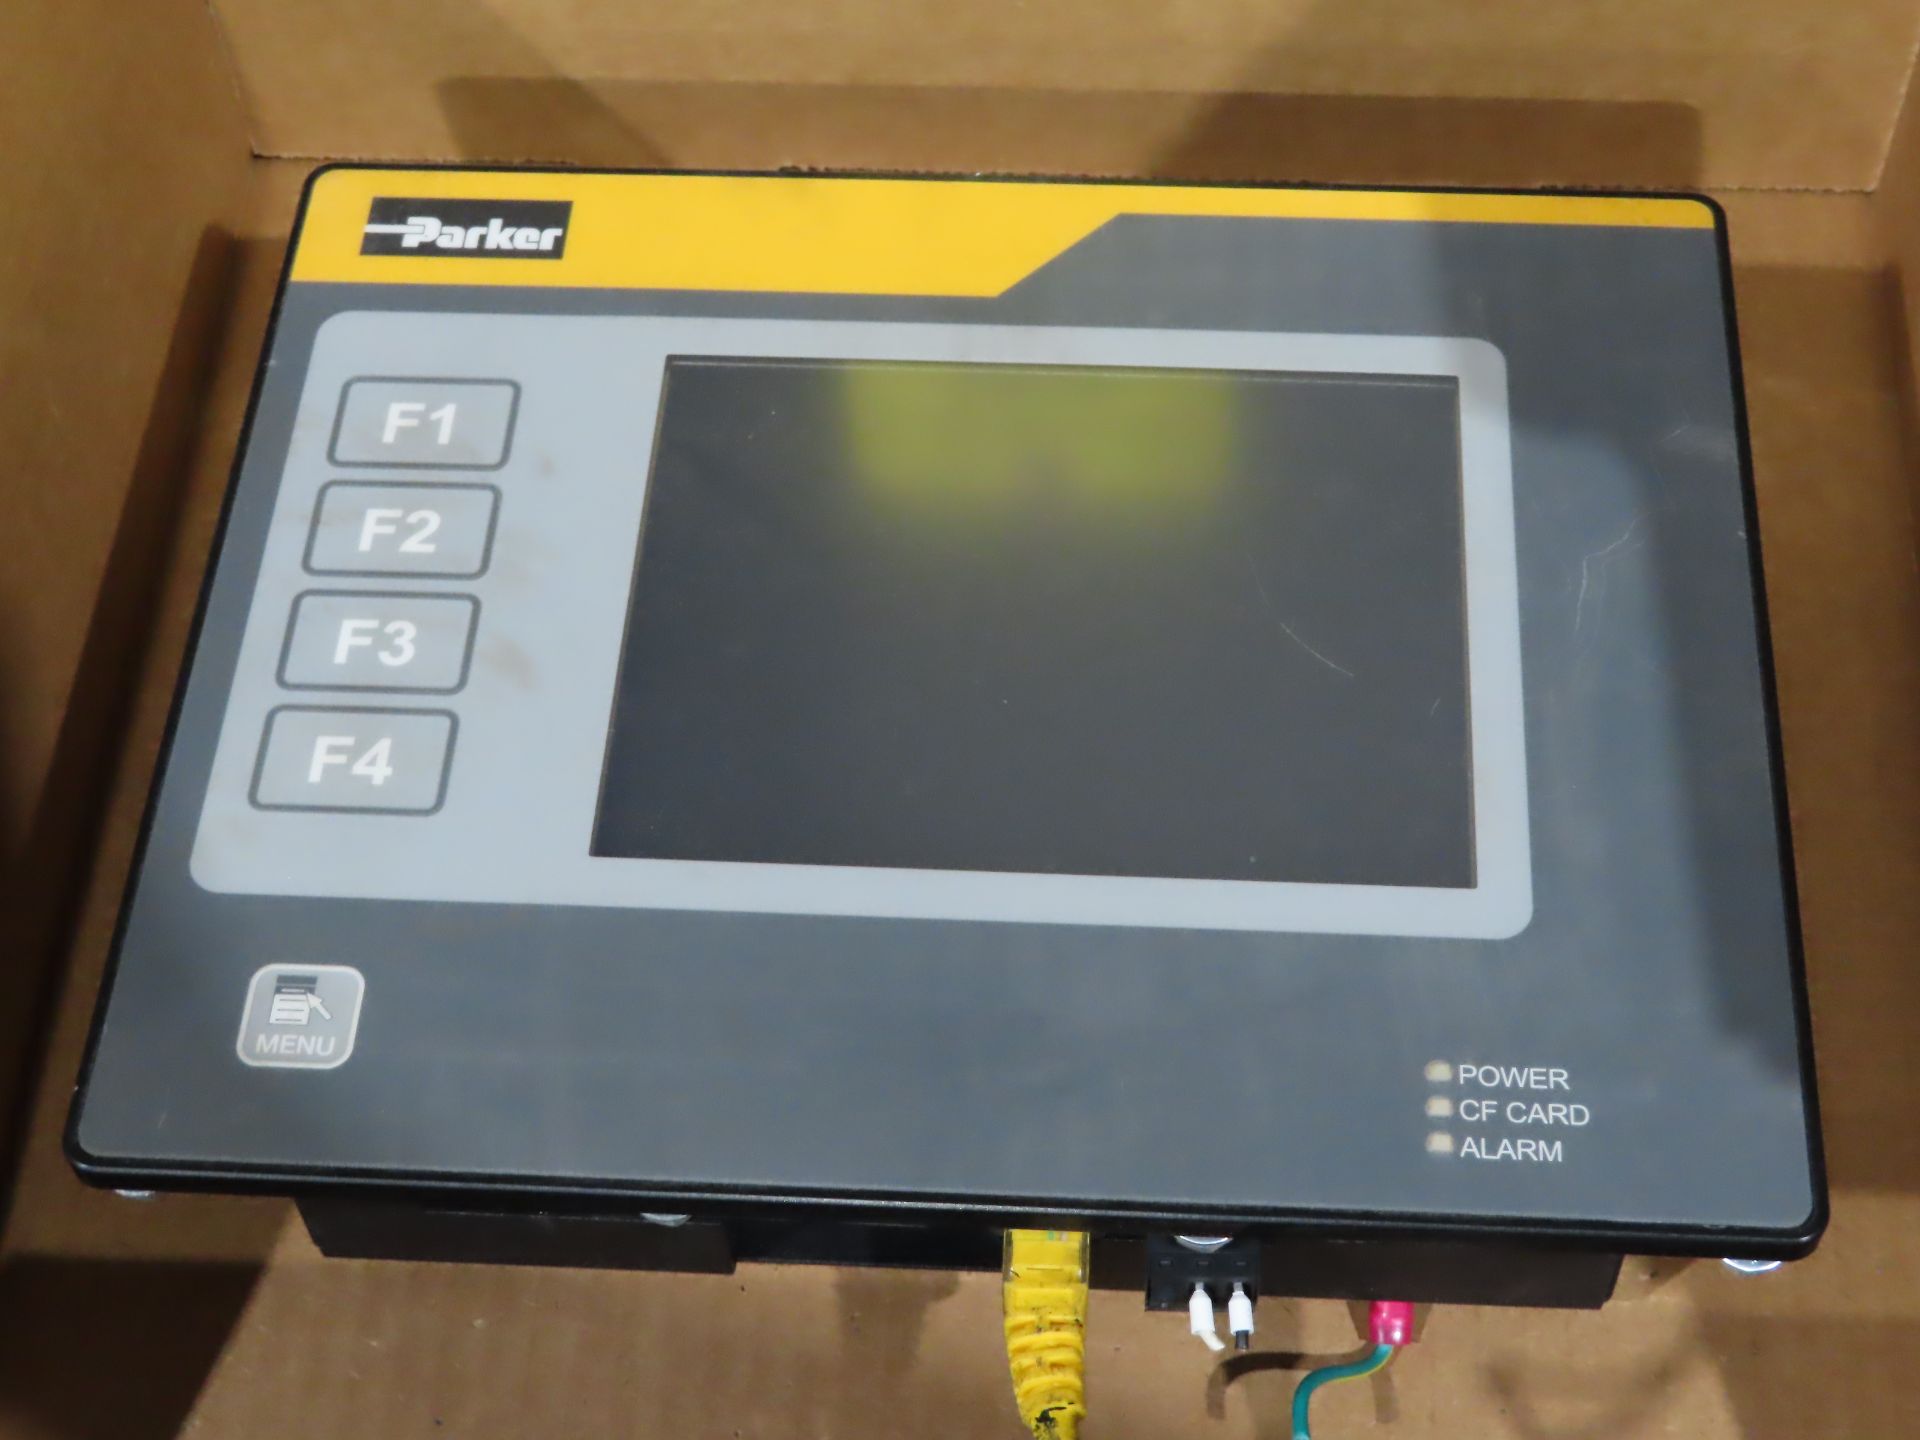 Parker user interface model TS8006/00/00, as always, with Brolyn LLC auctions, all lots can be - Image 2 of 3